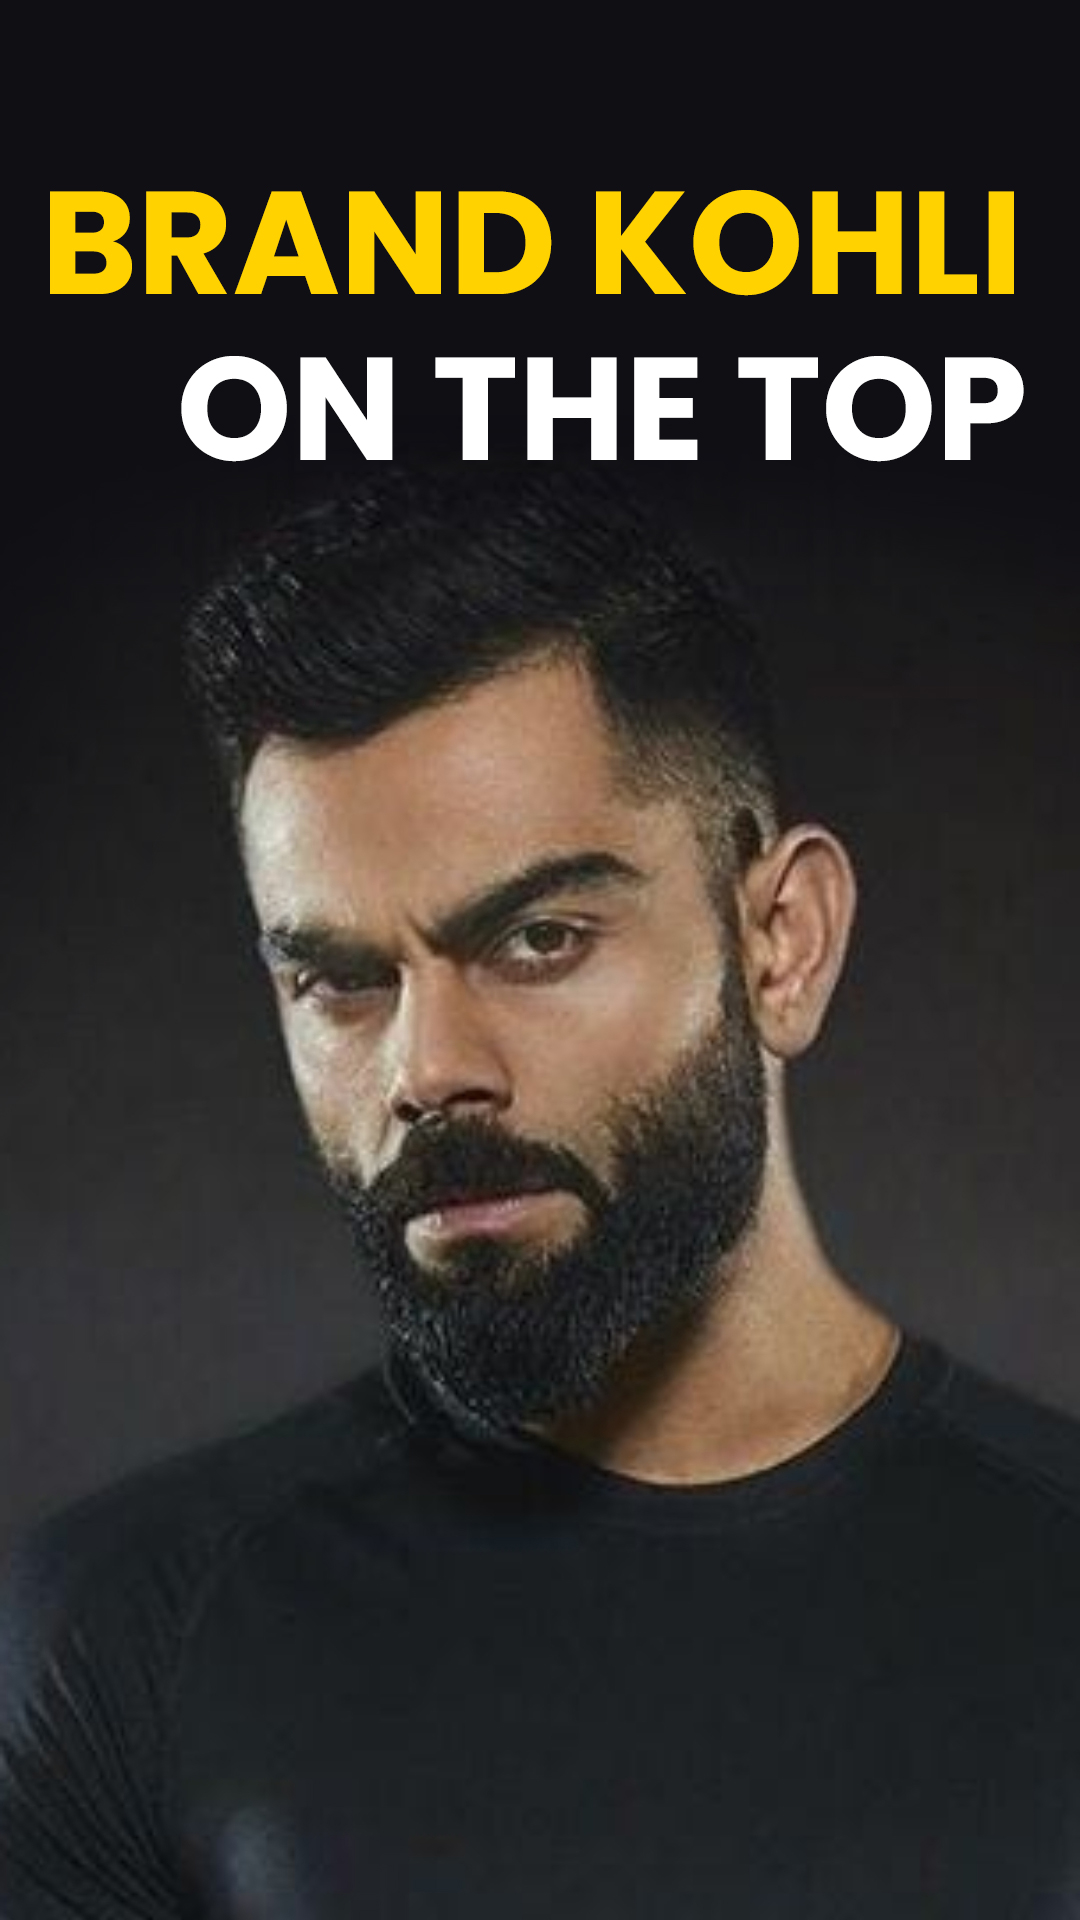 Brand Kohli remains top choice for endorsements for last six years